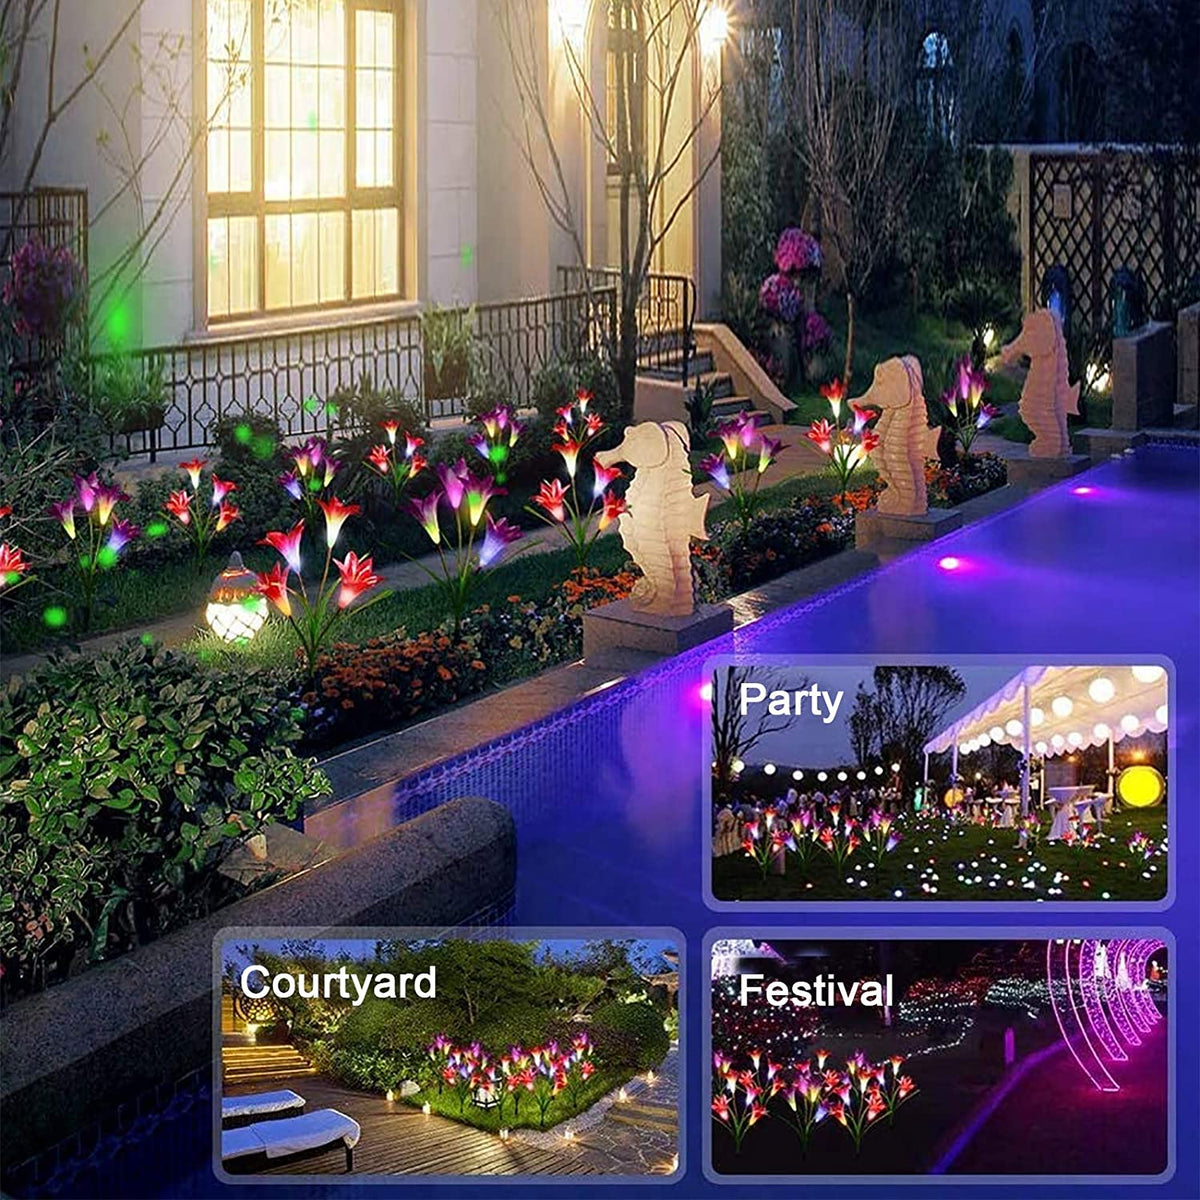 Outdoor Solar Garden Flower Lights 2 Pack(Purple and White Color)